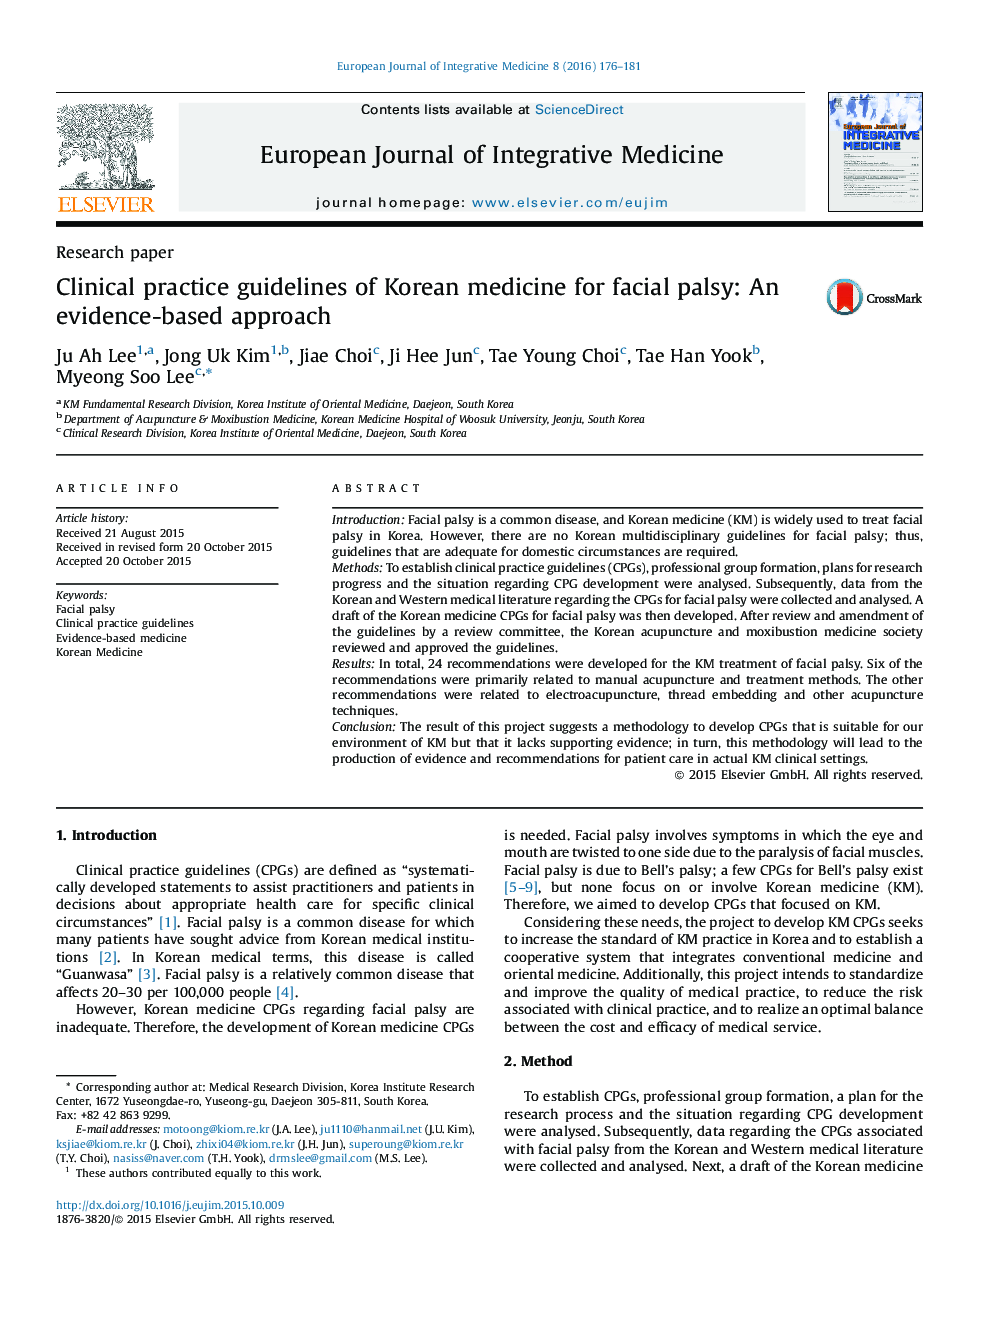 Clinical practice guidelines of Korean medicine for facial palsy: An evidence-based approach